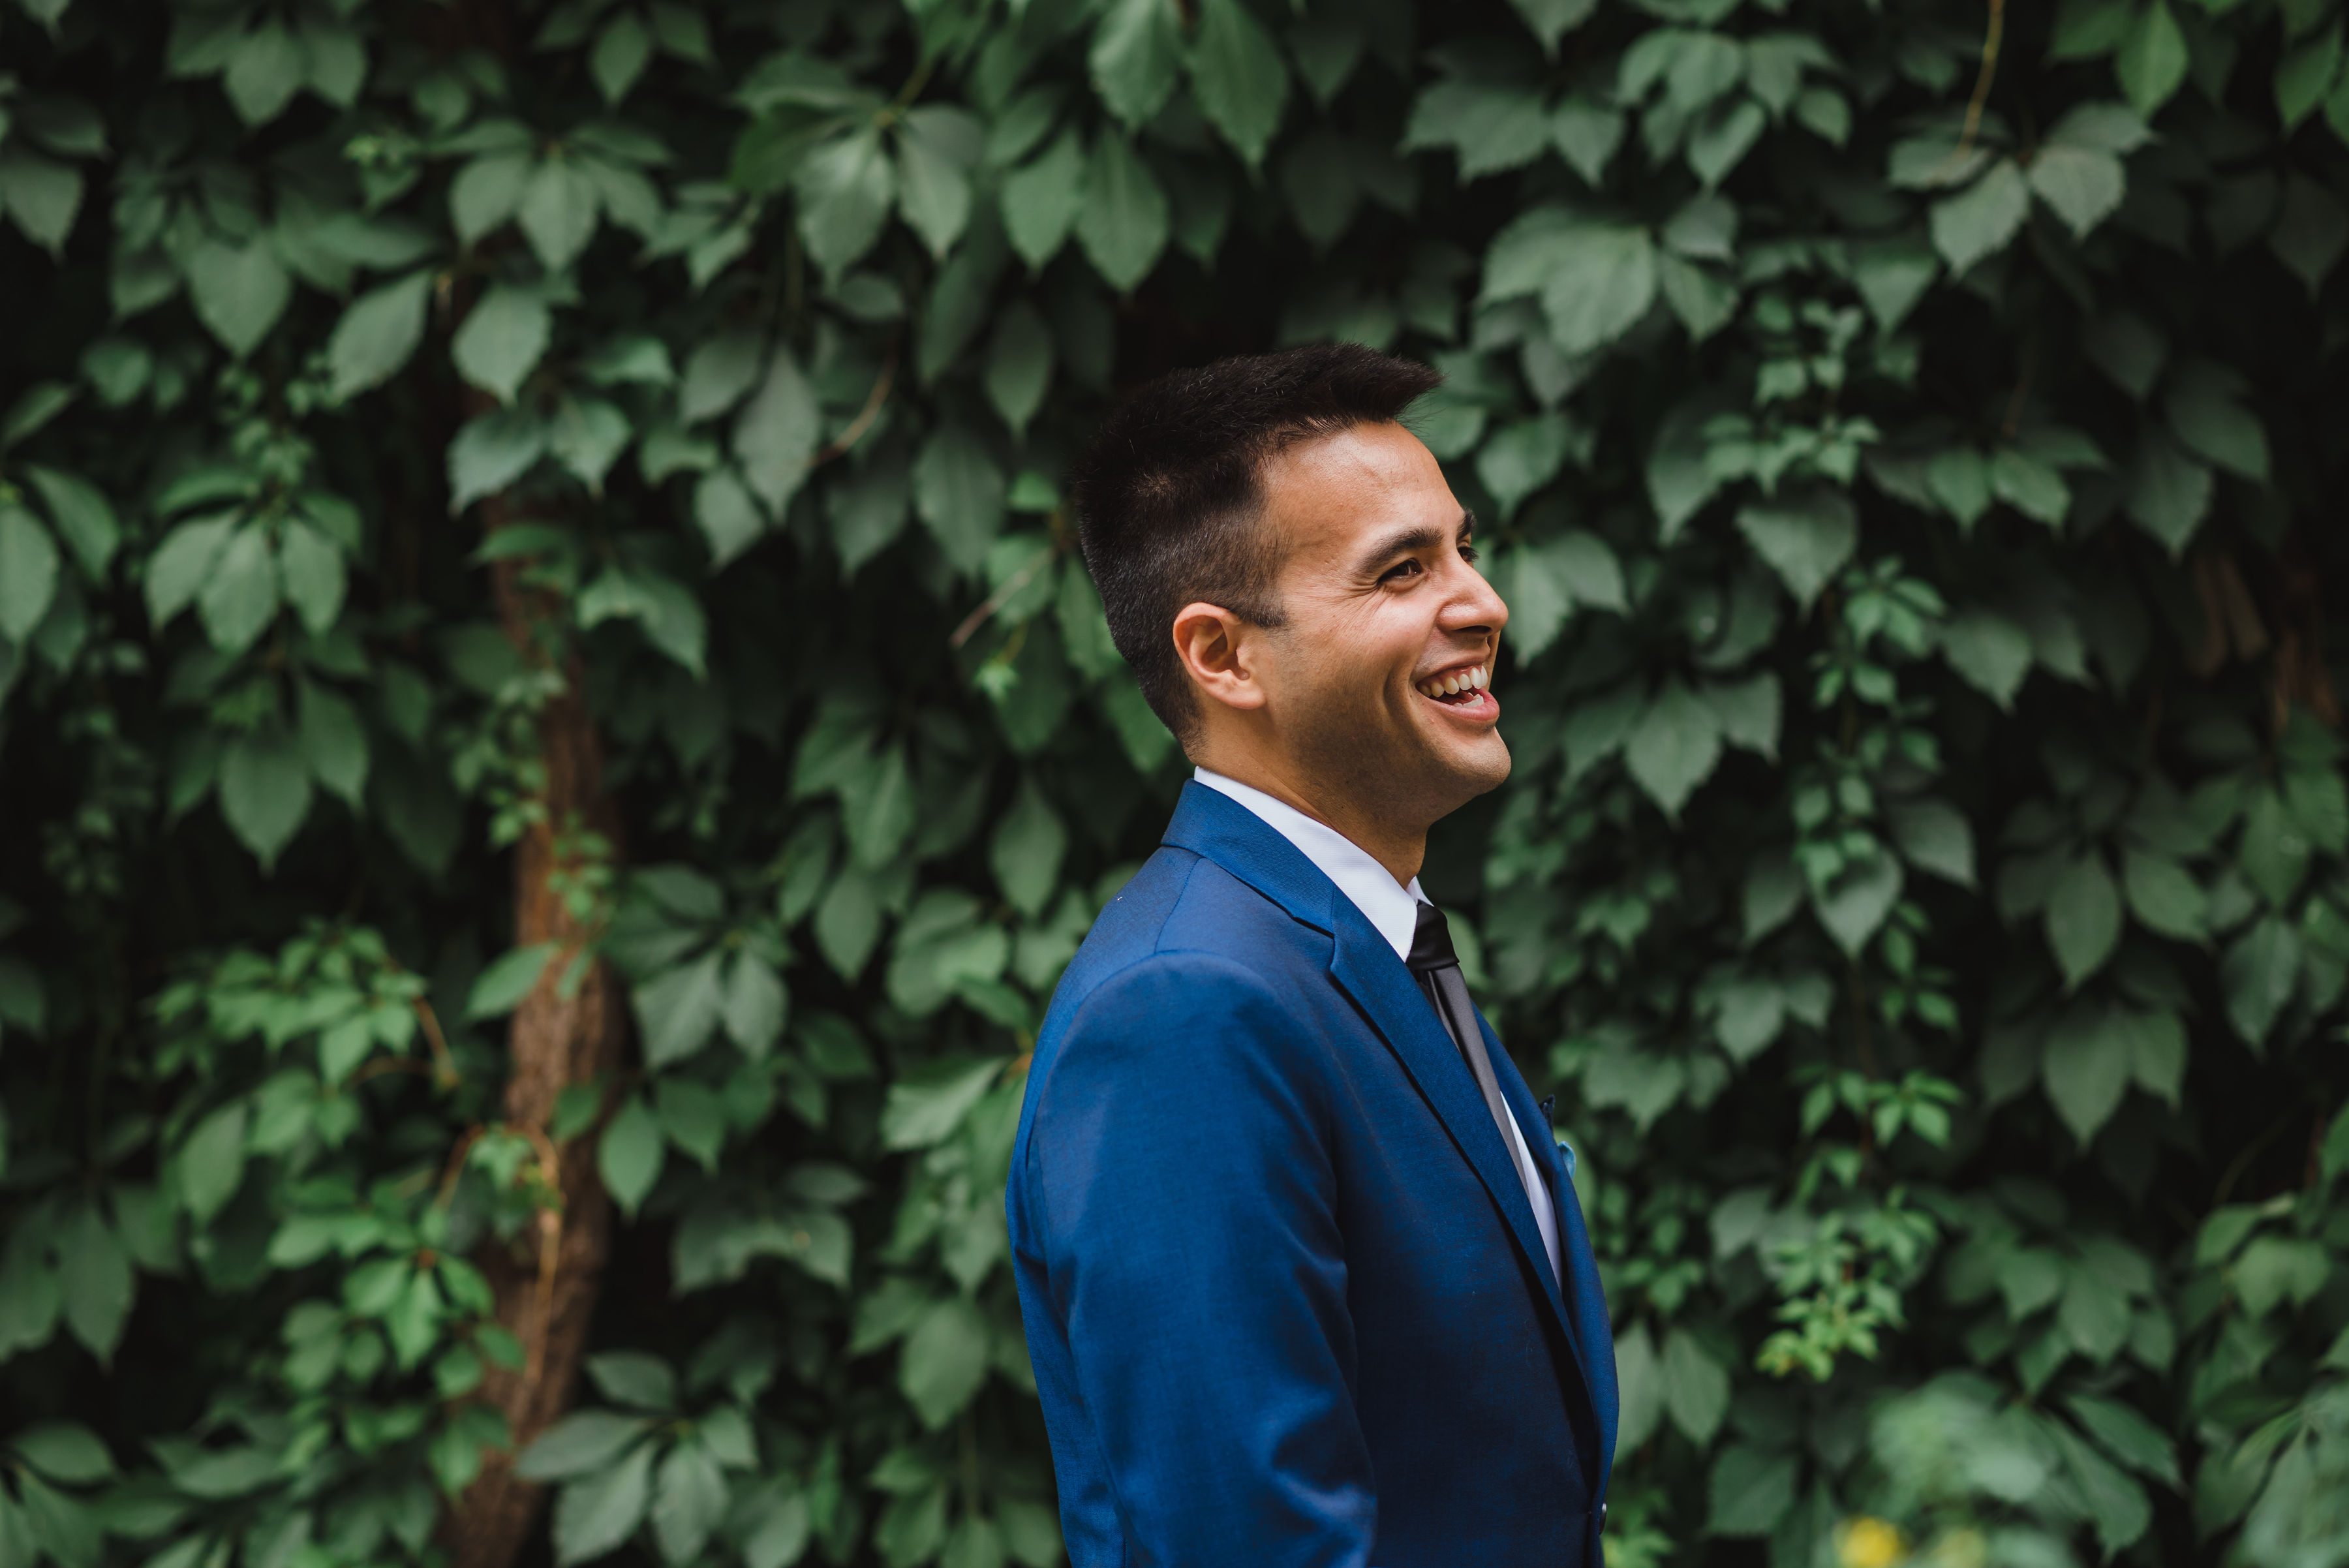 groom in blue suit smiling as he awaits his bride Toronto wedding photography